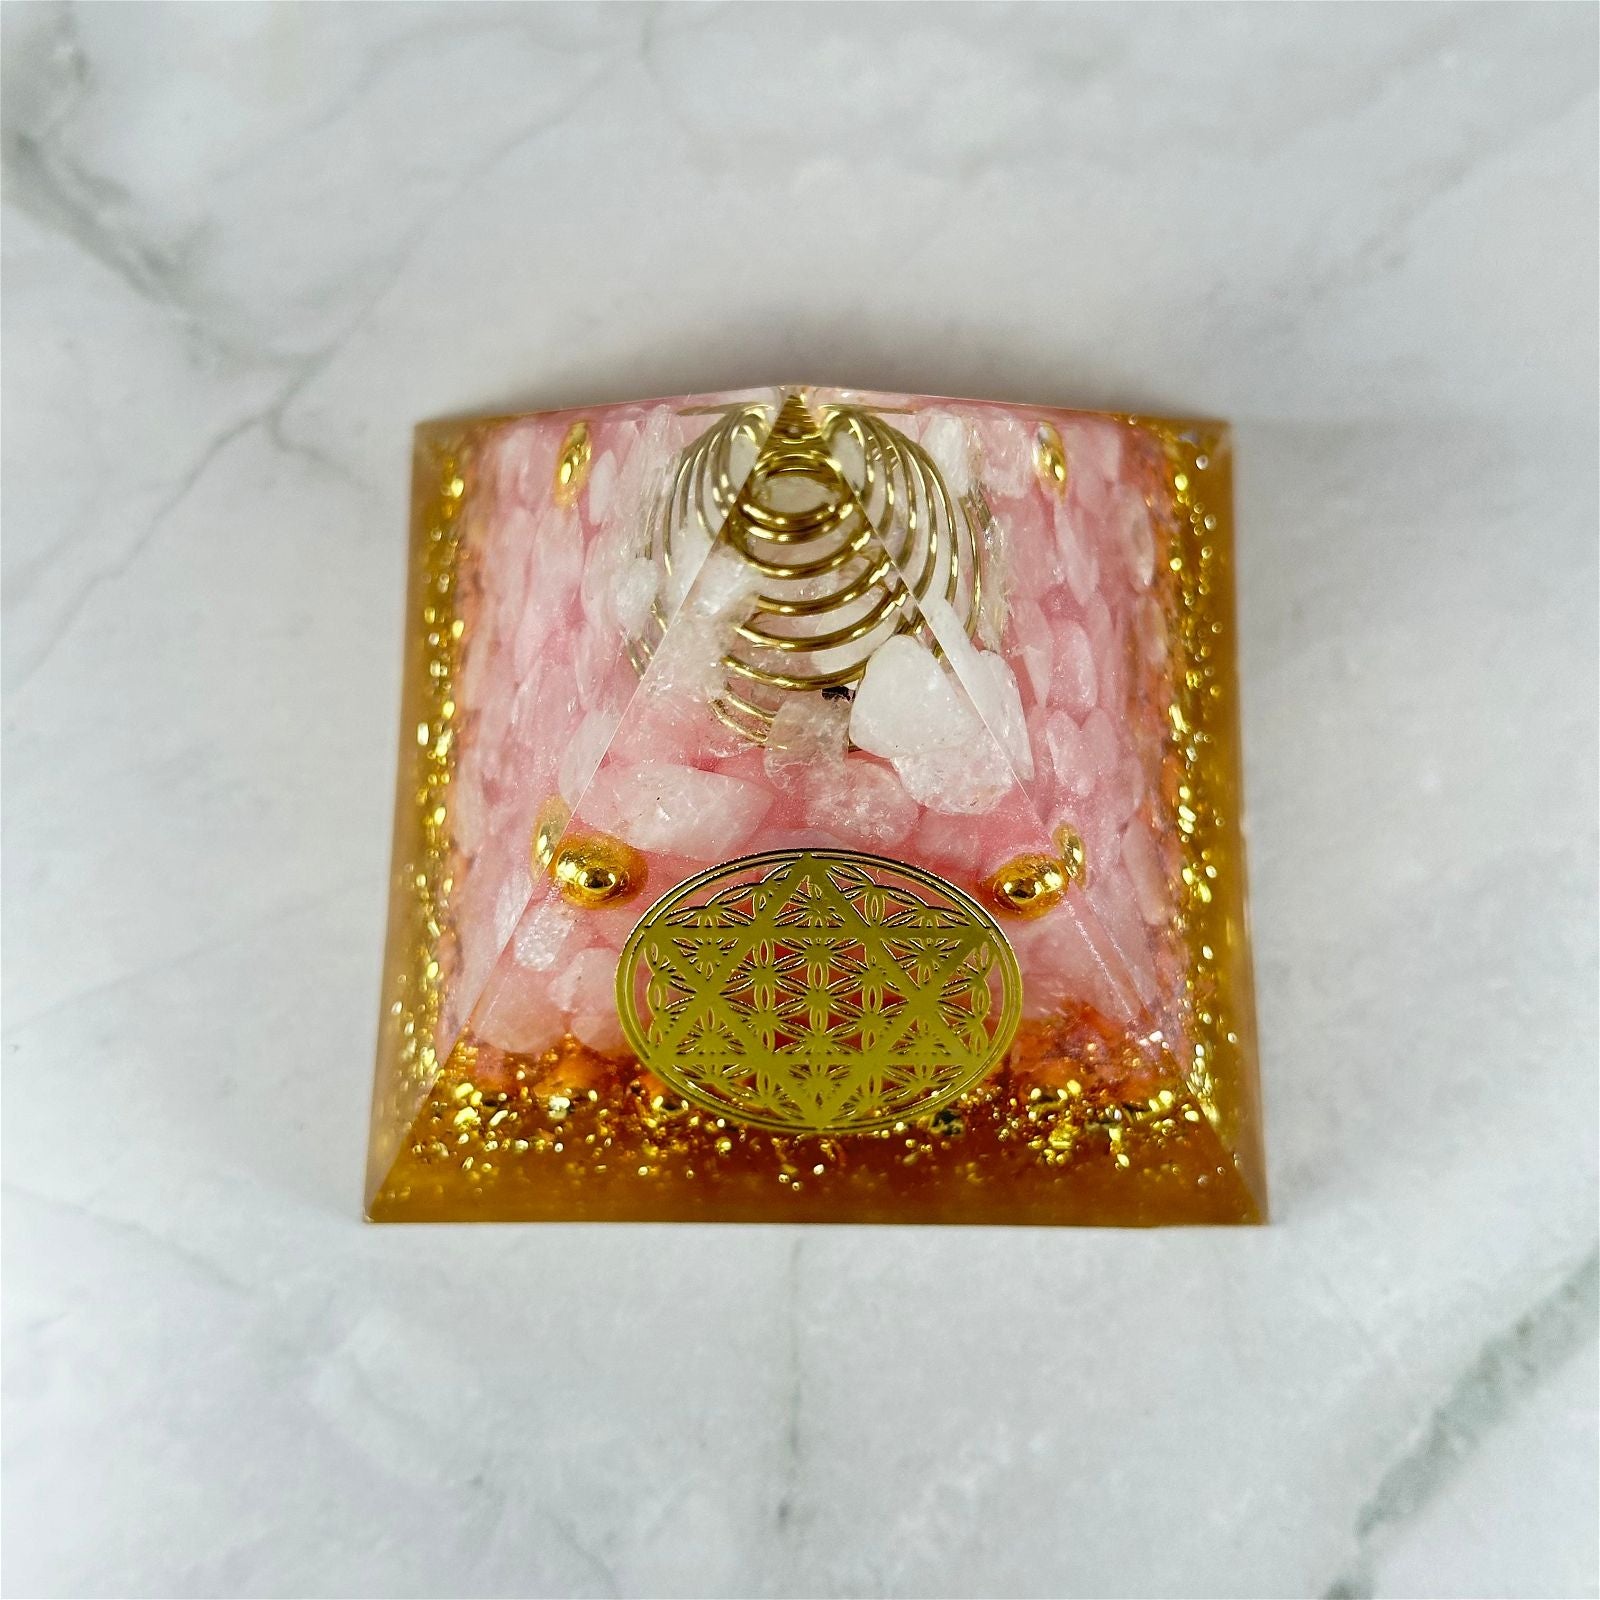 Orgonite pyramide Cristal de Roche & Quartz - Aeternum - a picture of a cake on the side of a wall  - # boutique ésoterisme# - #wicca# 